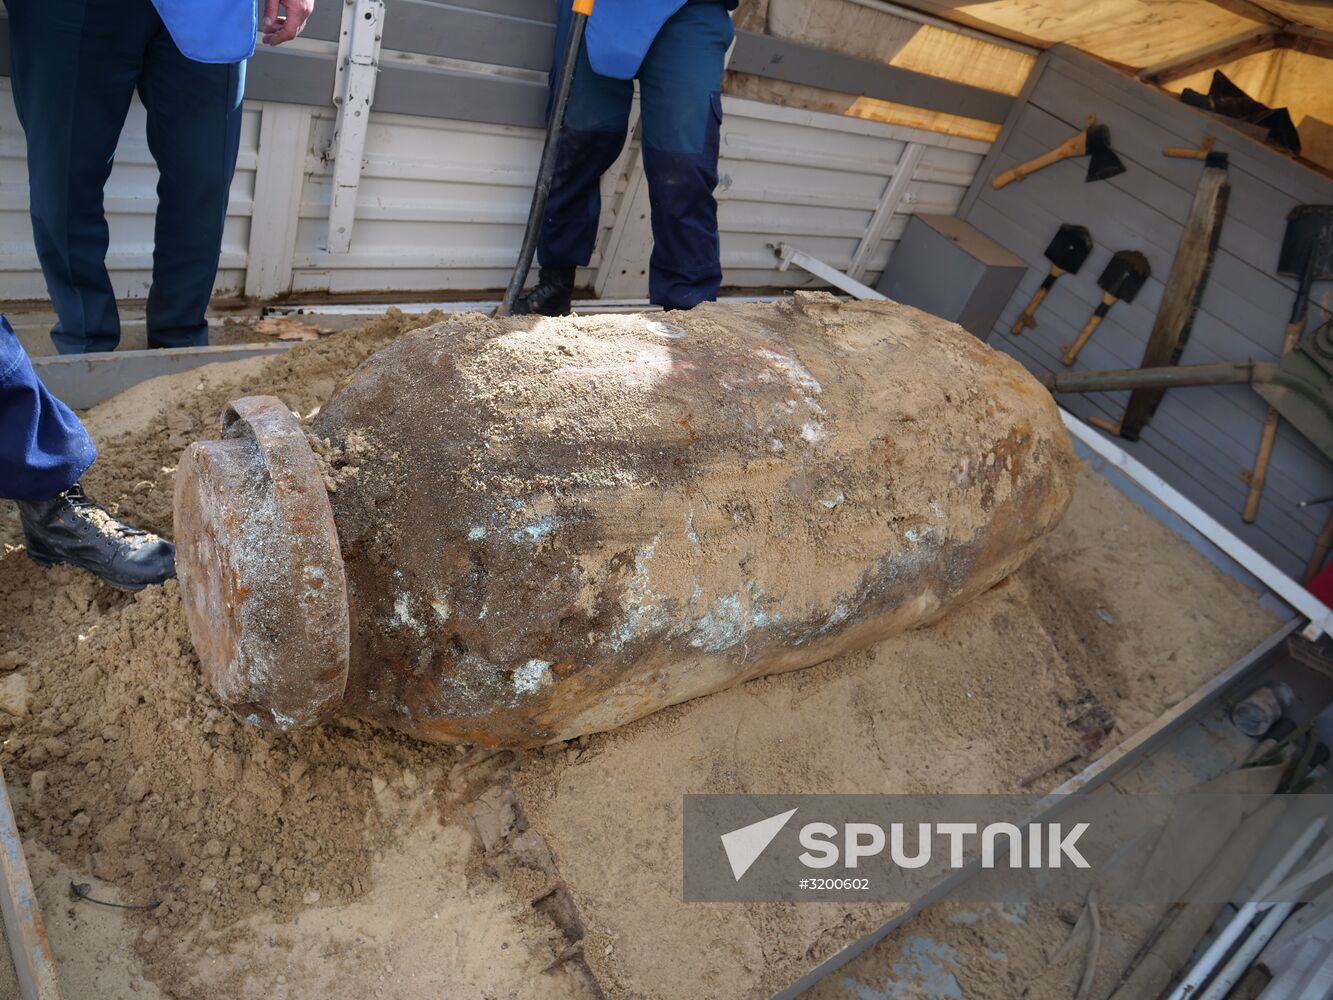 WWII German bomb defused in Moscow